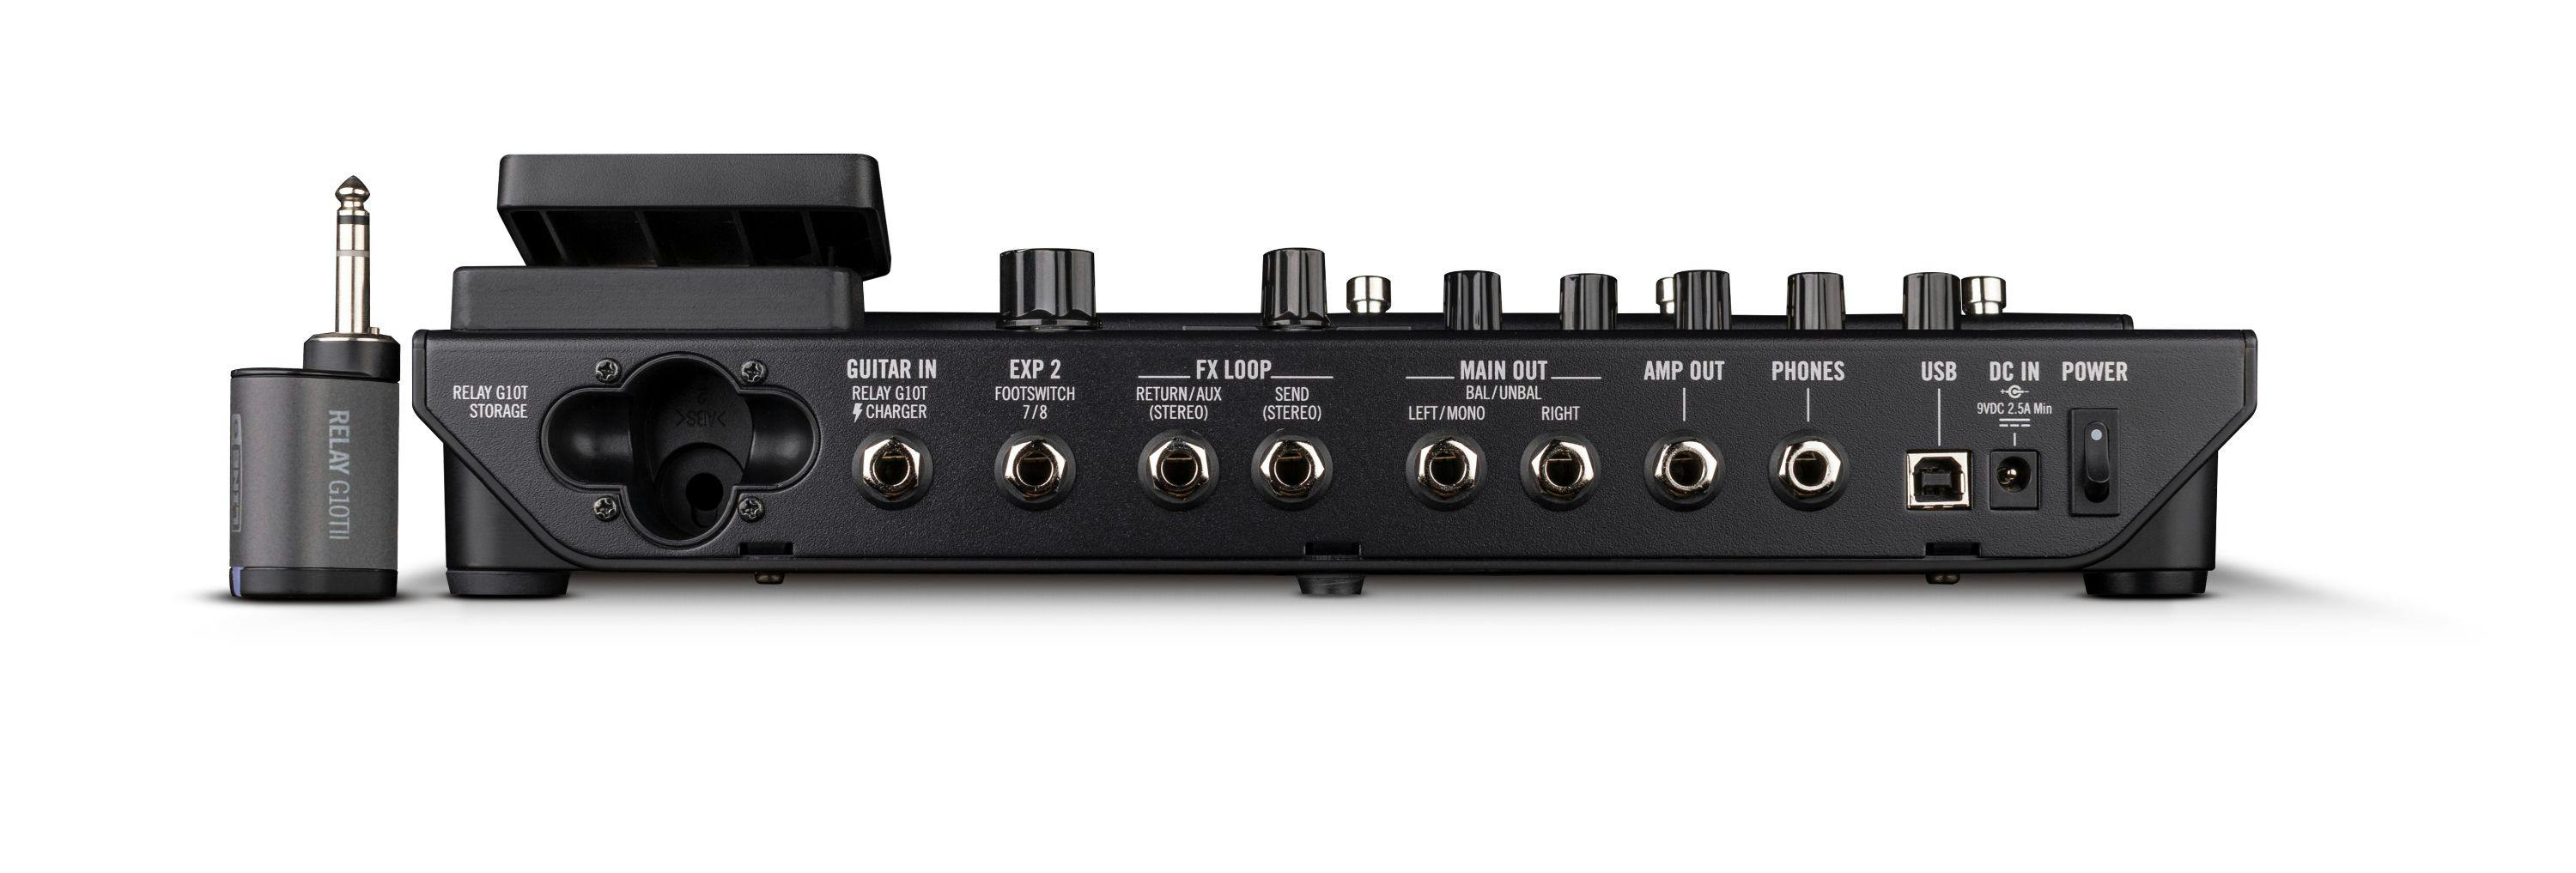 Line 6 Pod Go Wireless Modelling and Multi-Effects Pedal - Andertons Music  Co.